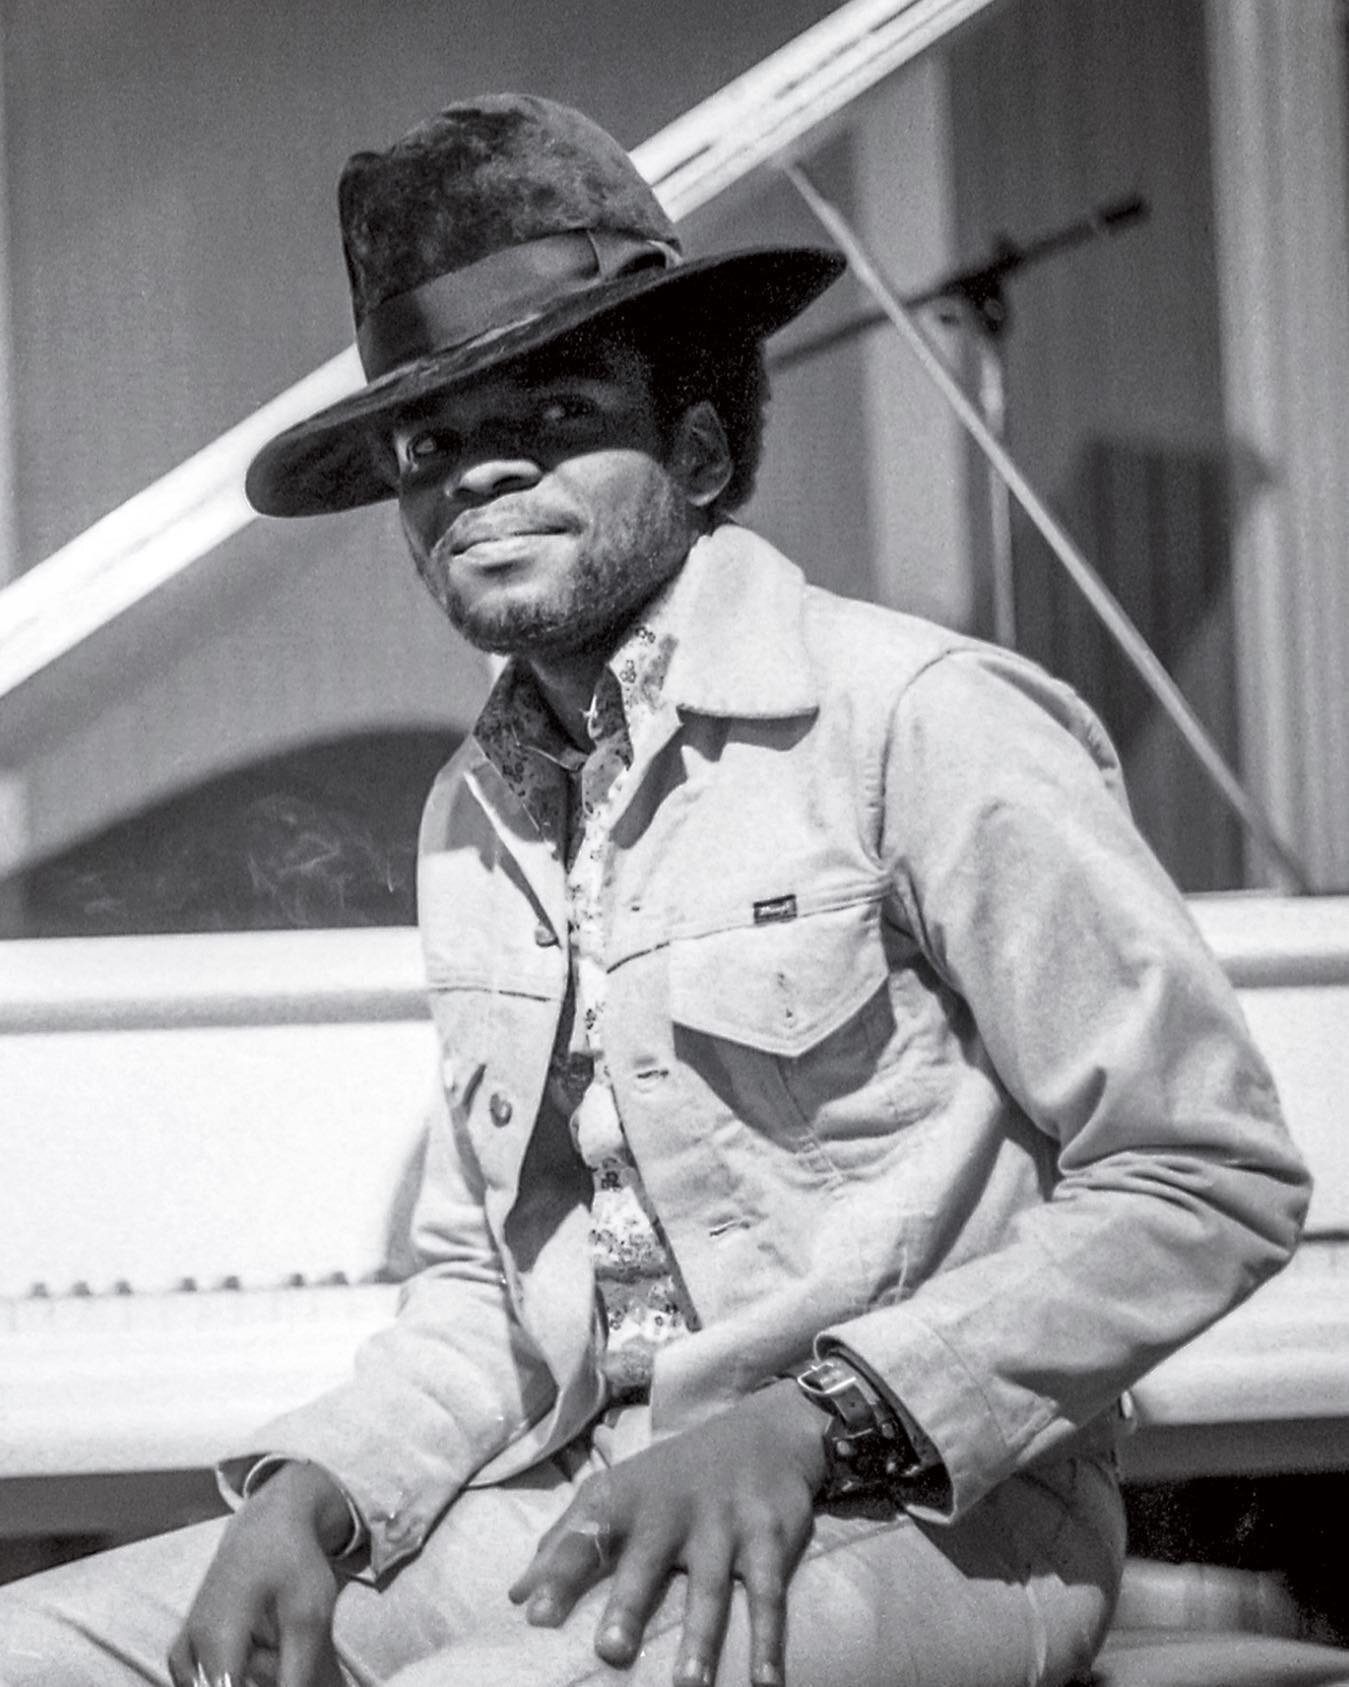 Billy Preston at the piano recording his  first solo album on Apple Records - Encouraging Words. I think Billy was probably the nicest person I ever met, an incredible musician who would always light the room with his infectious smile. Listening to h